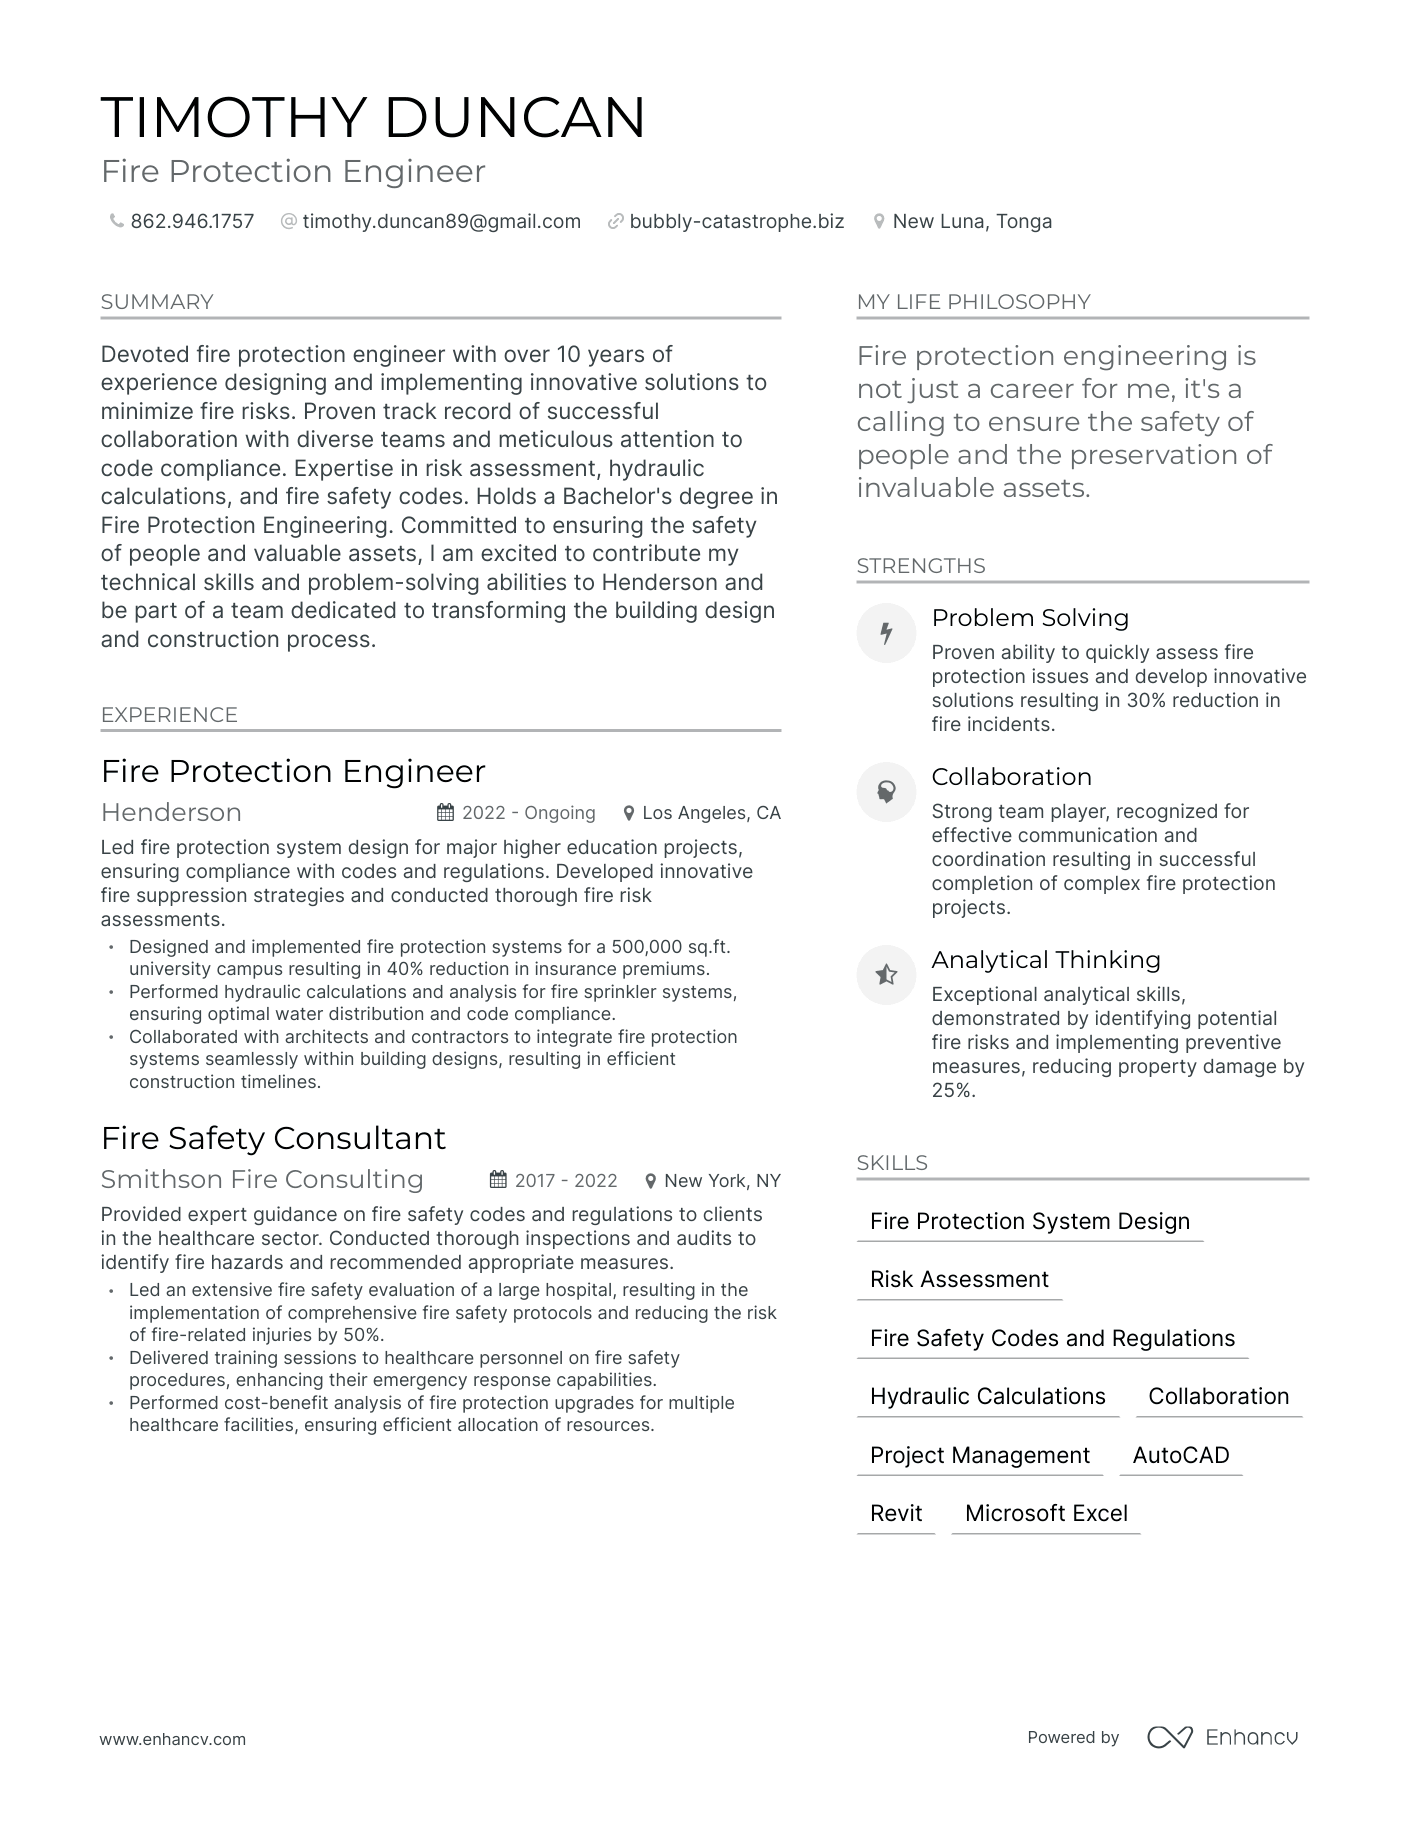 Fire Protection Engineer resume example